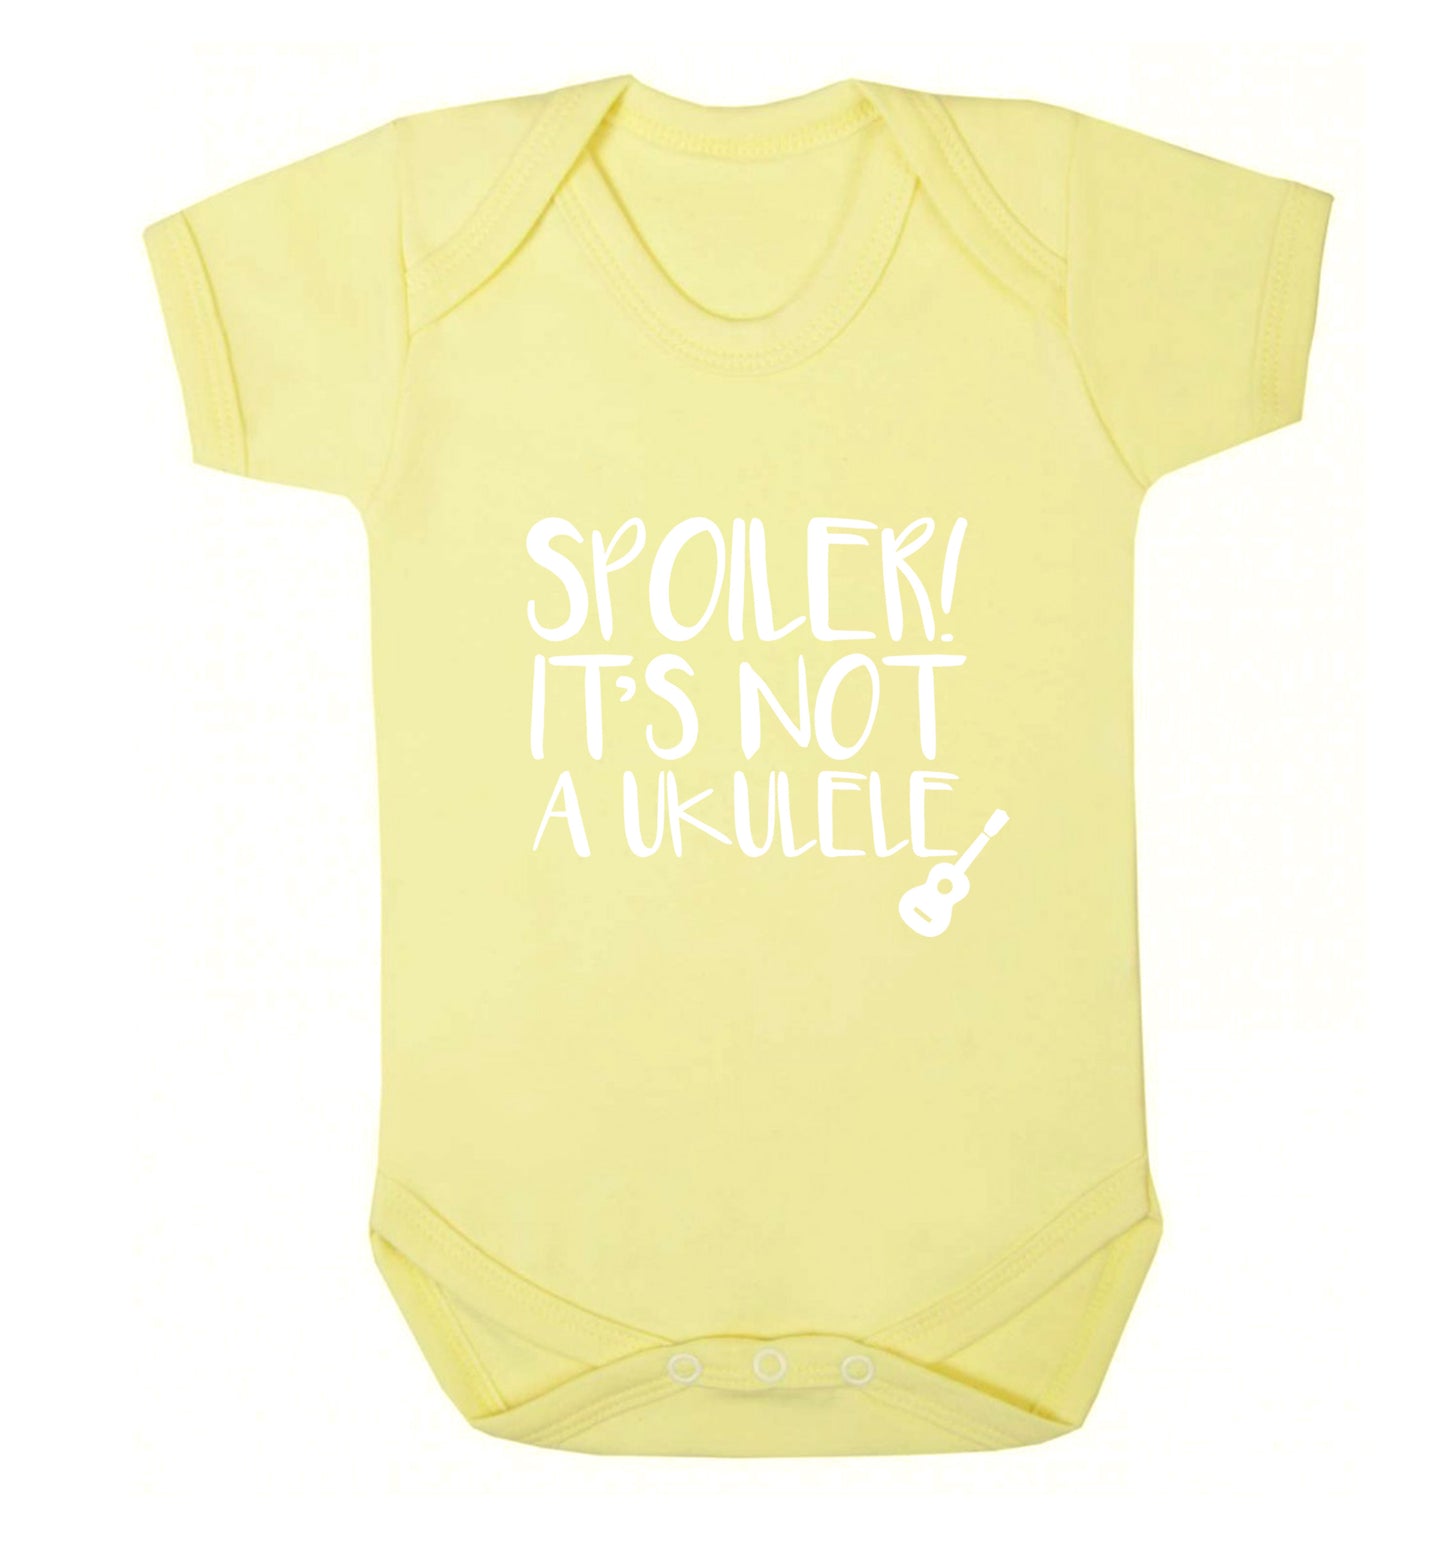 Spoiler it's not a ukulele Baby Vest pale yellow 18-24 months